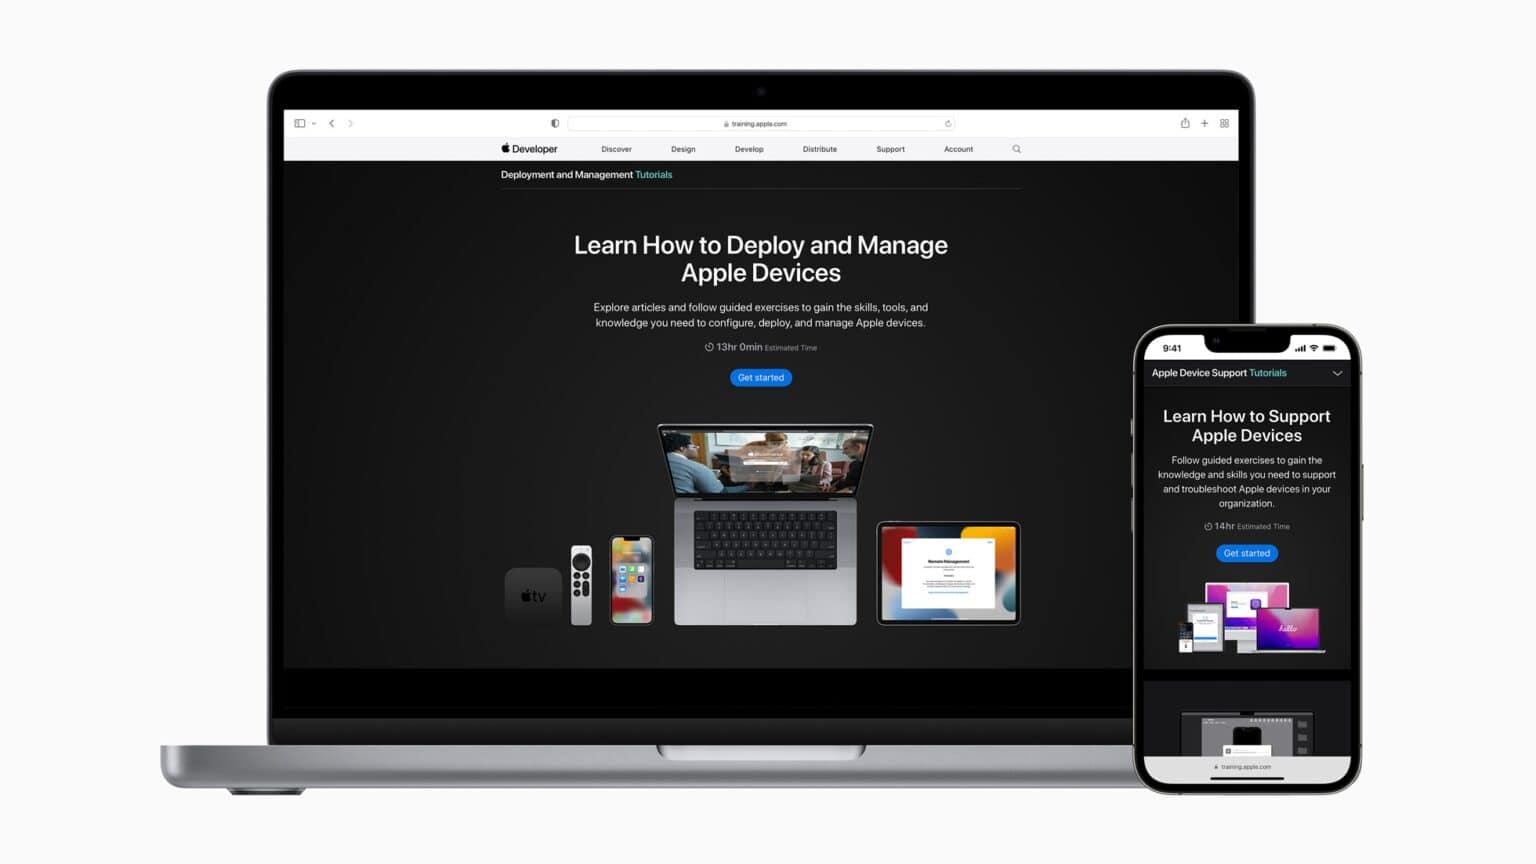 Apple introduces online training courses on device support and deployment for IT pros